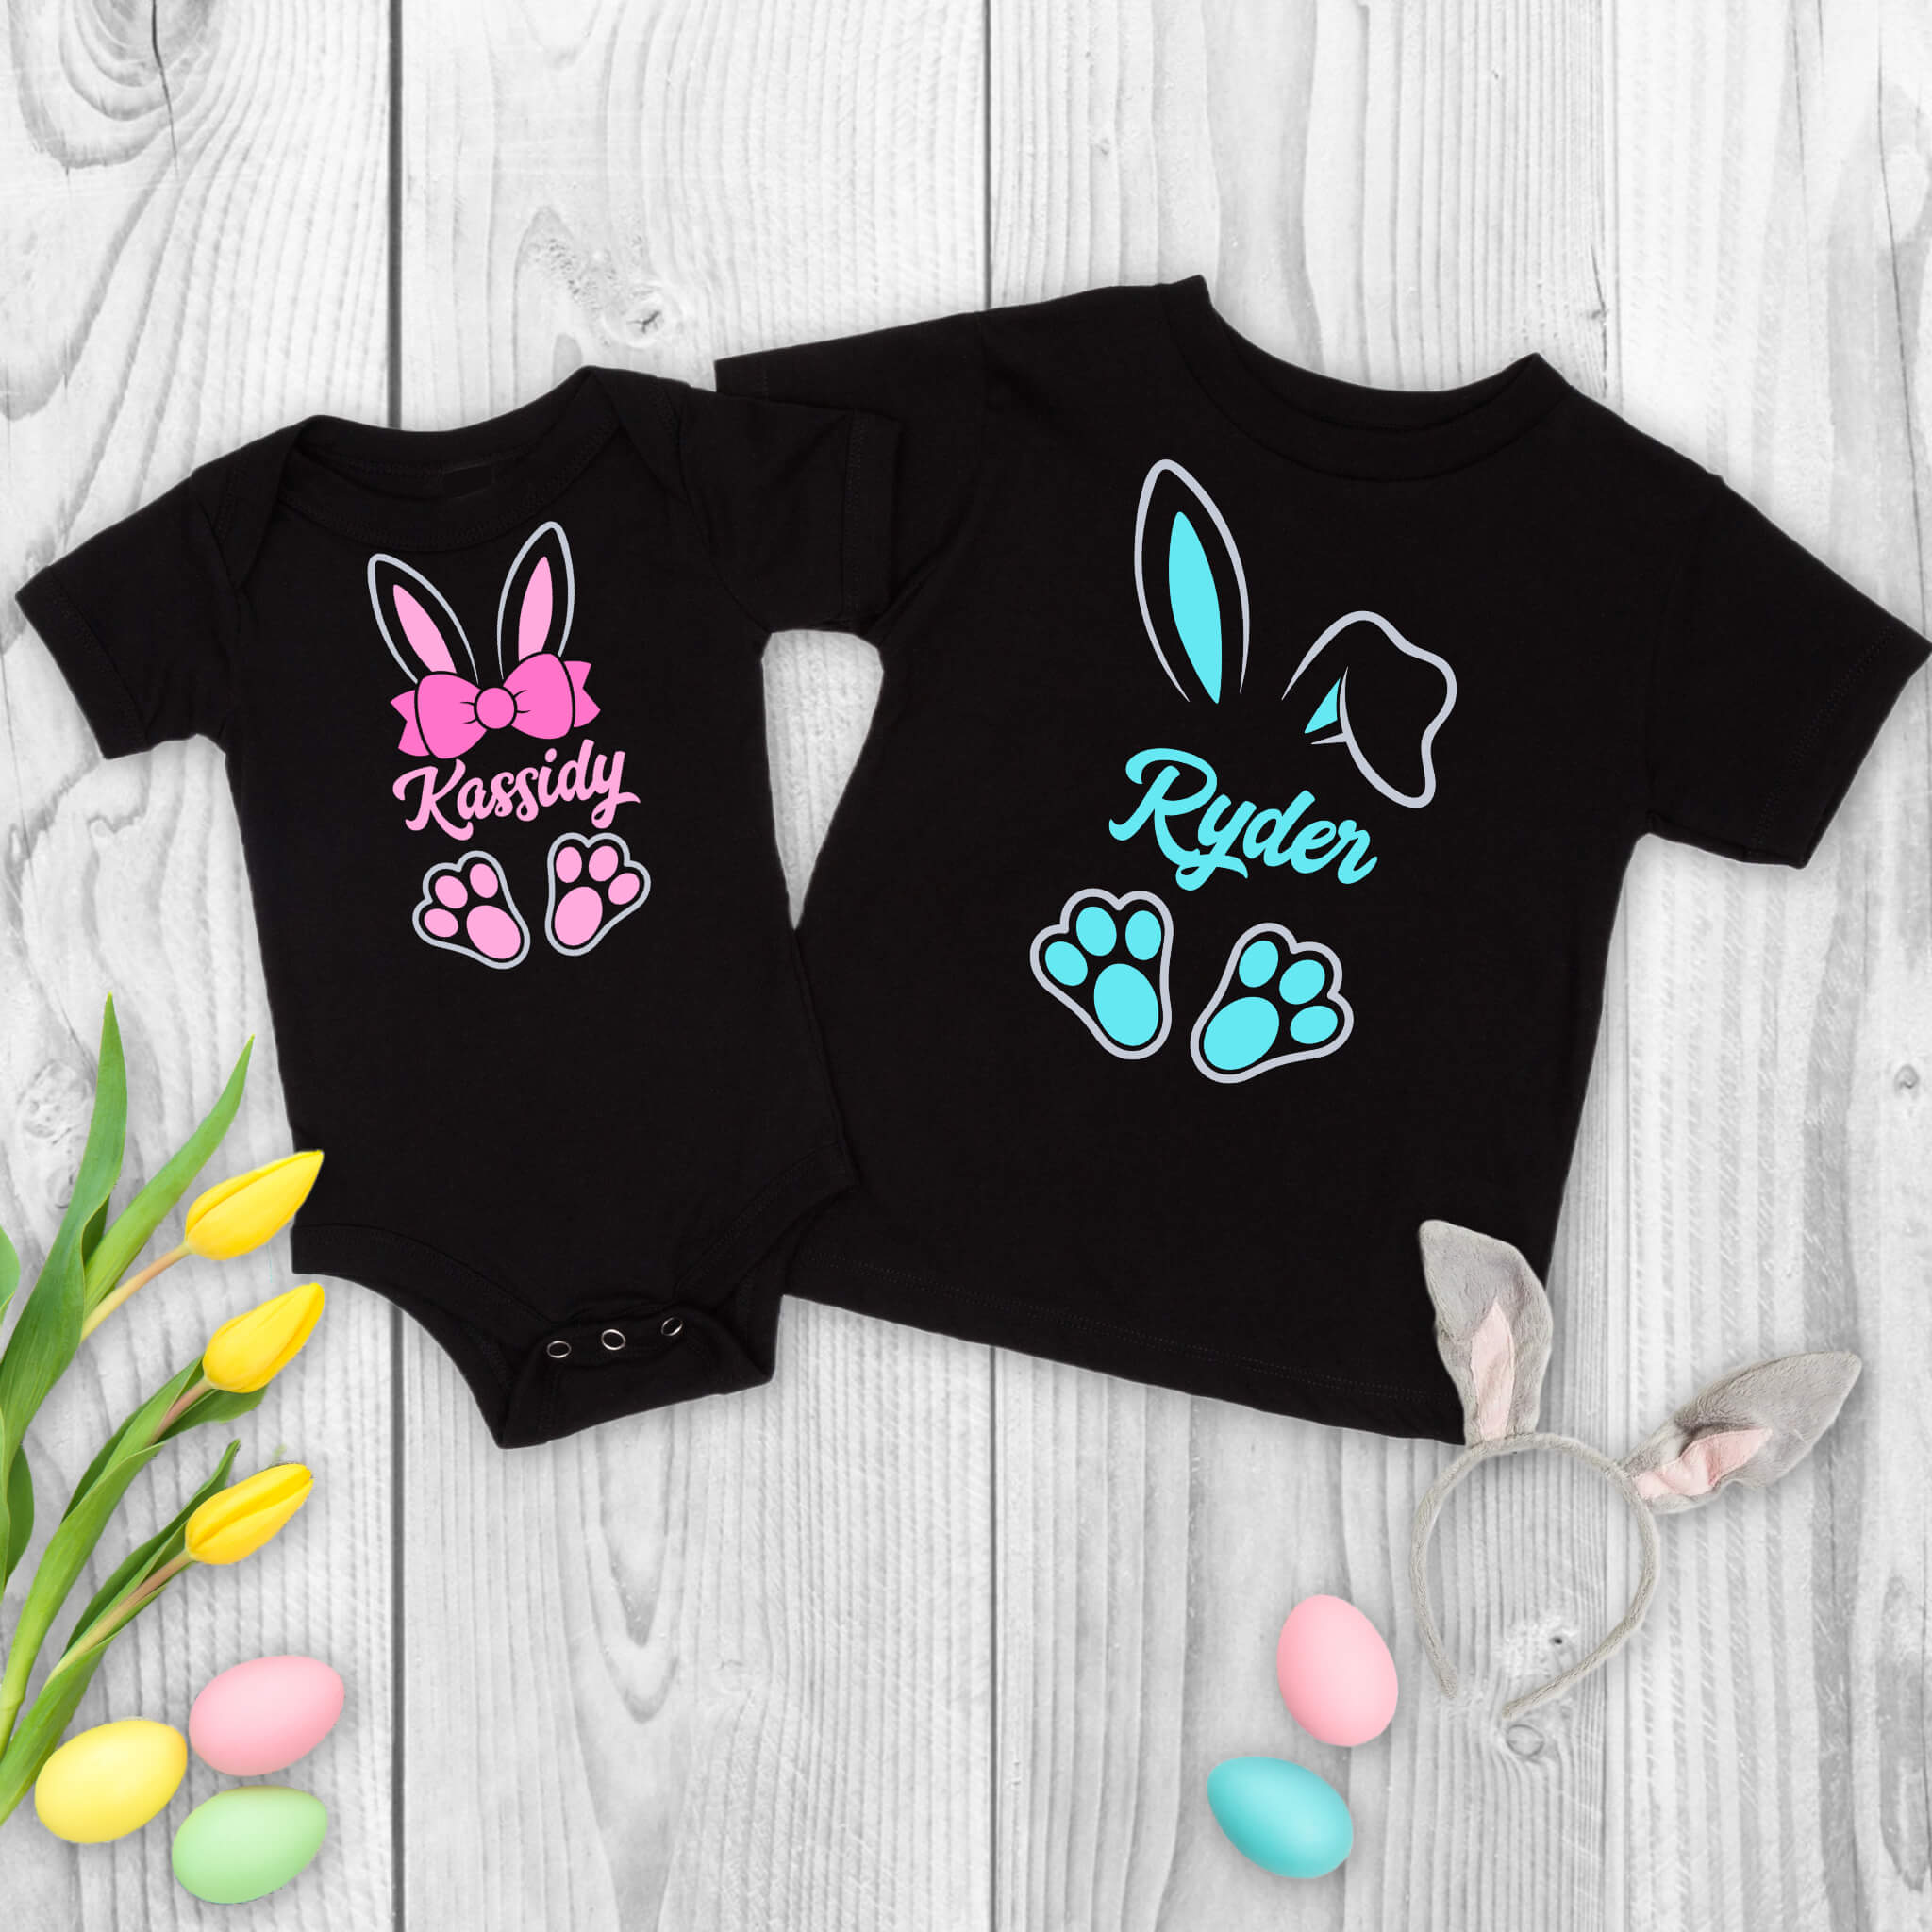 Easter, Customized, Personalized, Bunny Name, Boys, Girls, Twins, Baby, Onesie, Infant T-Shirt